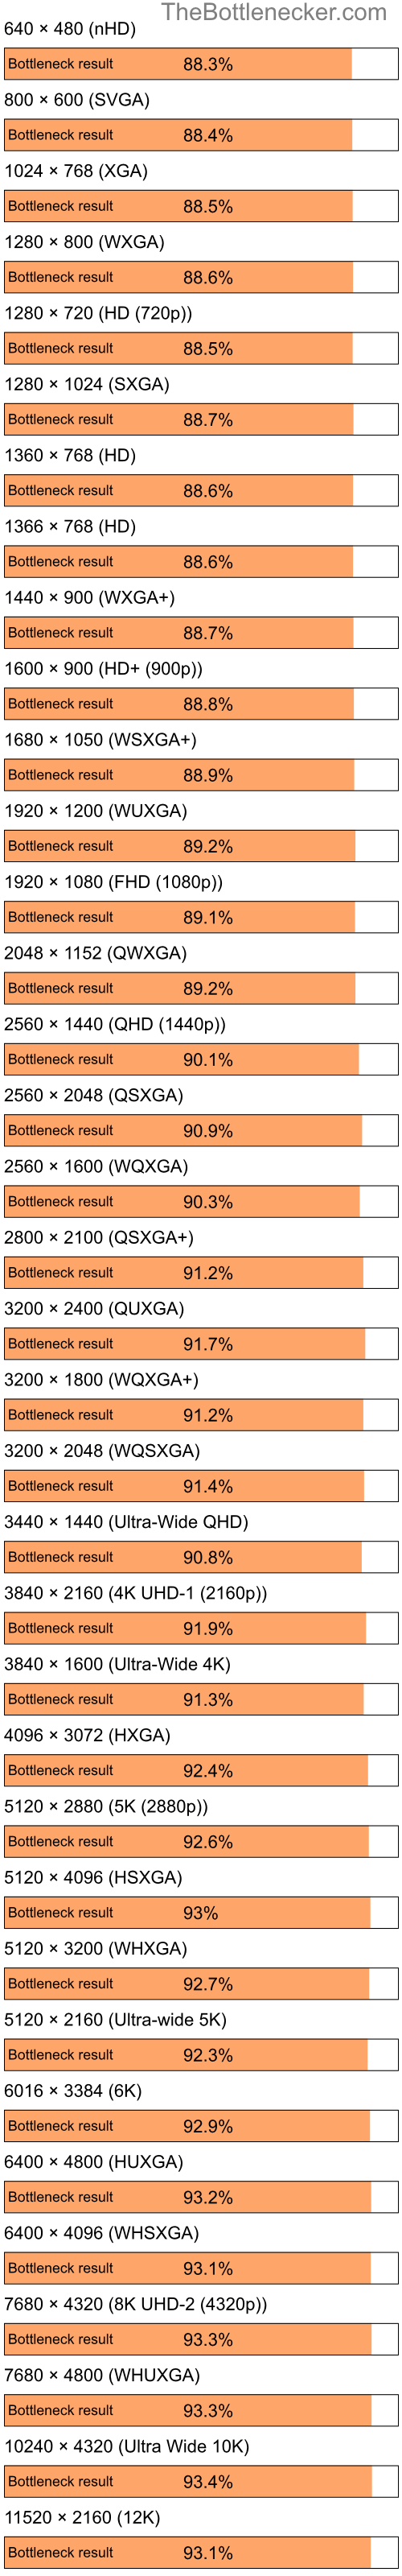 Bottleneck results by resolution for Intel Pentium 4 and NVIDIA GeForce4 MX 420 in General Tasks